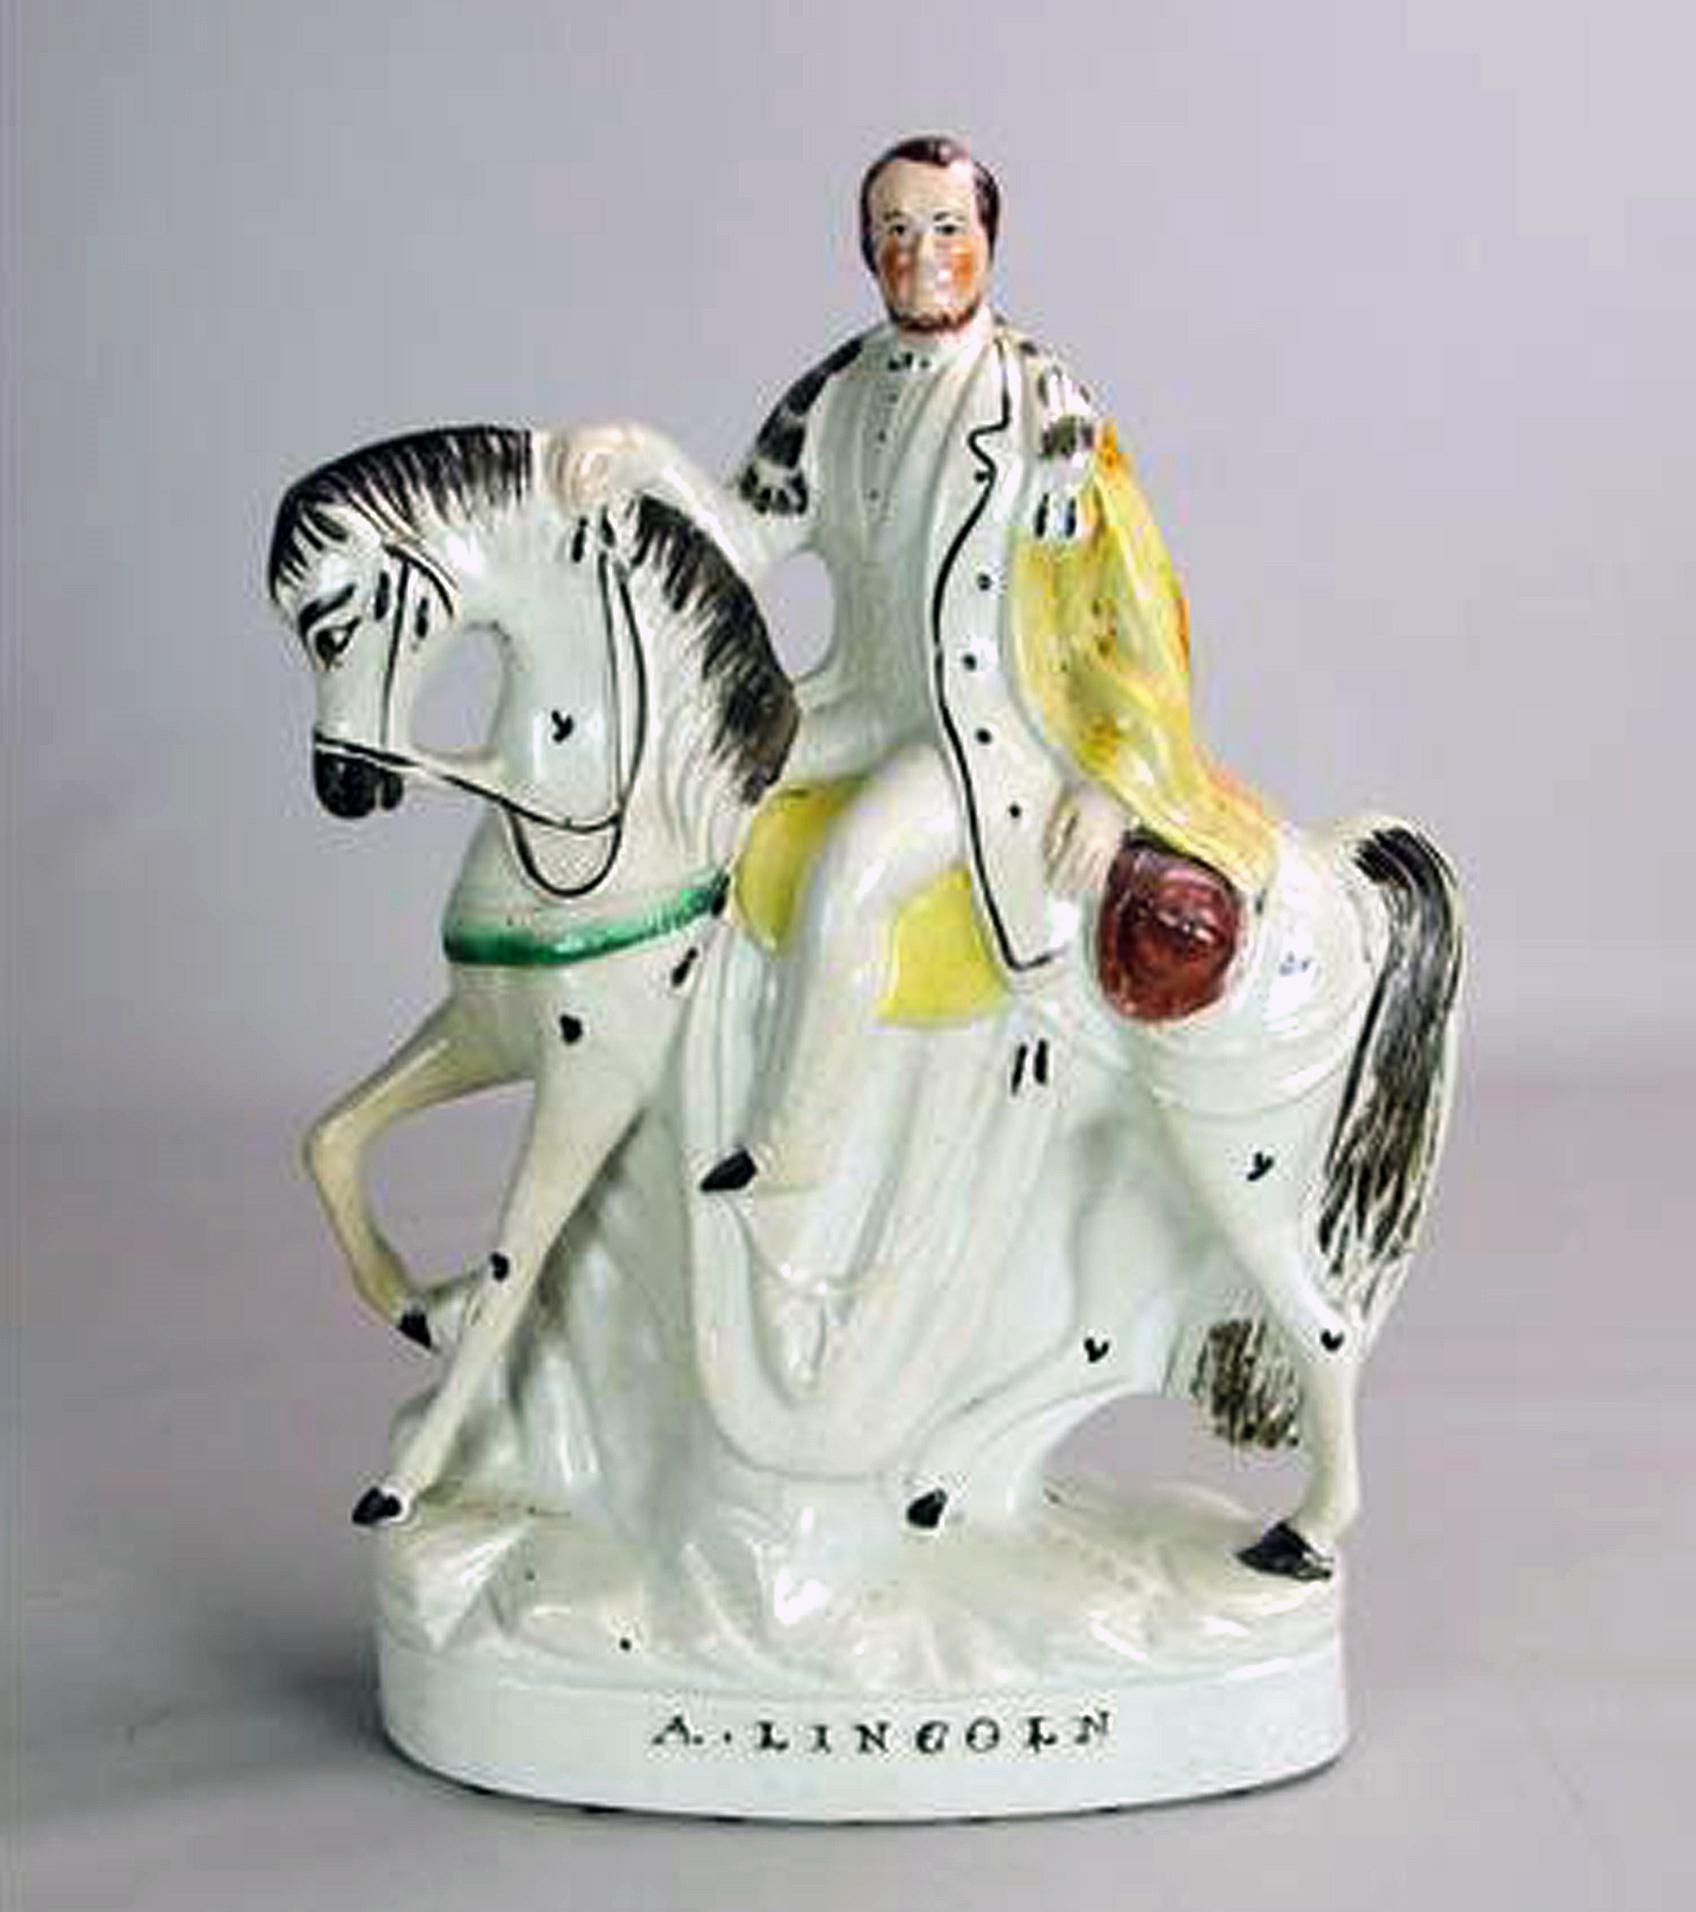 Staffordshire Pottery Figure of Lincoln on Horseback
Mid-19th Century

The figure depicts President Abraham Lincoln sitting on horseback, his head turned towards the viewer, on an oval base with the name A. LINCOLN embossed in black in the front